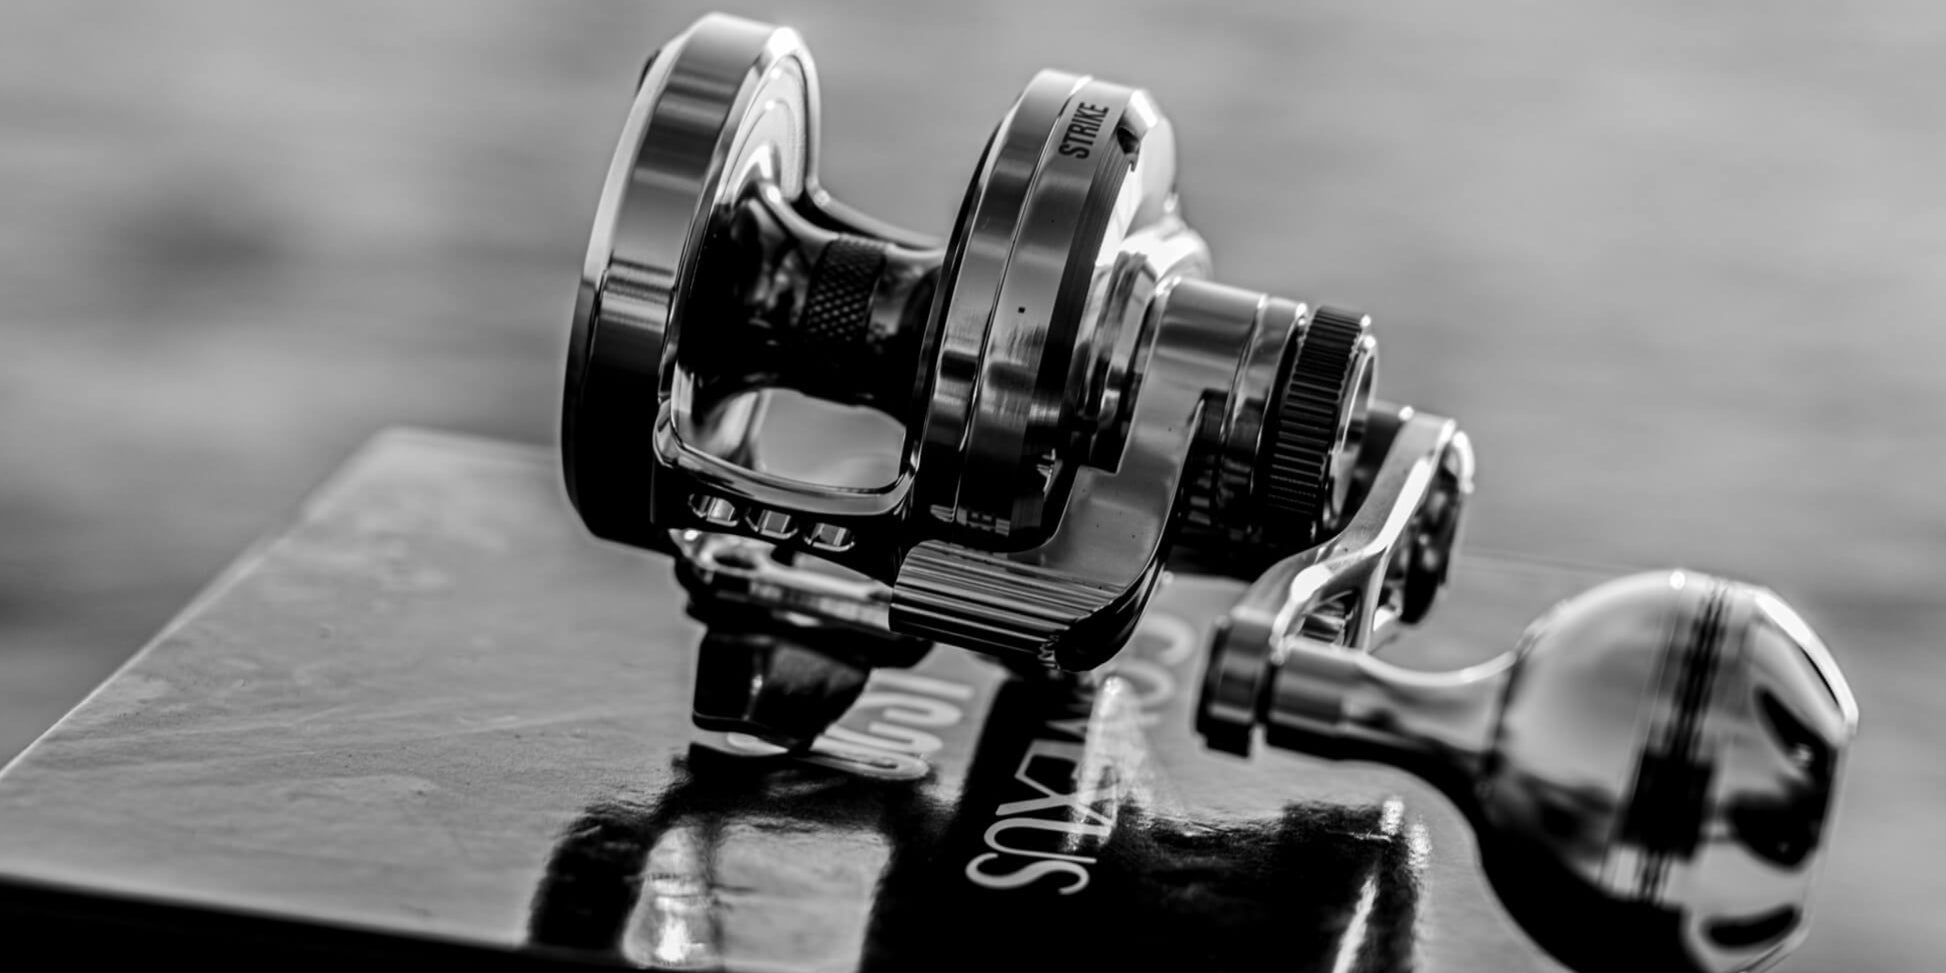 Gomexus Slow Pitch Jigging Reel LS20 - Captain's Choice for Superior Performance